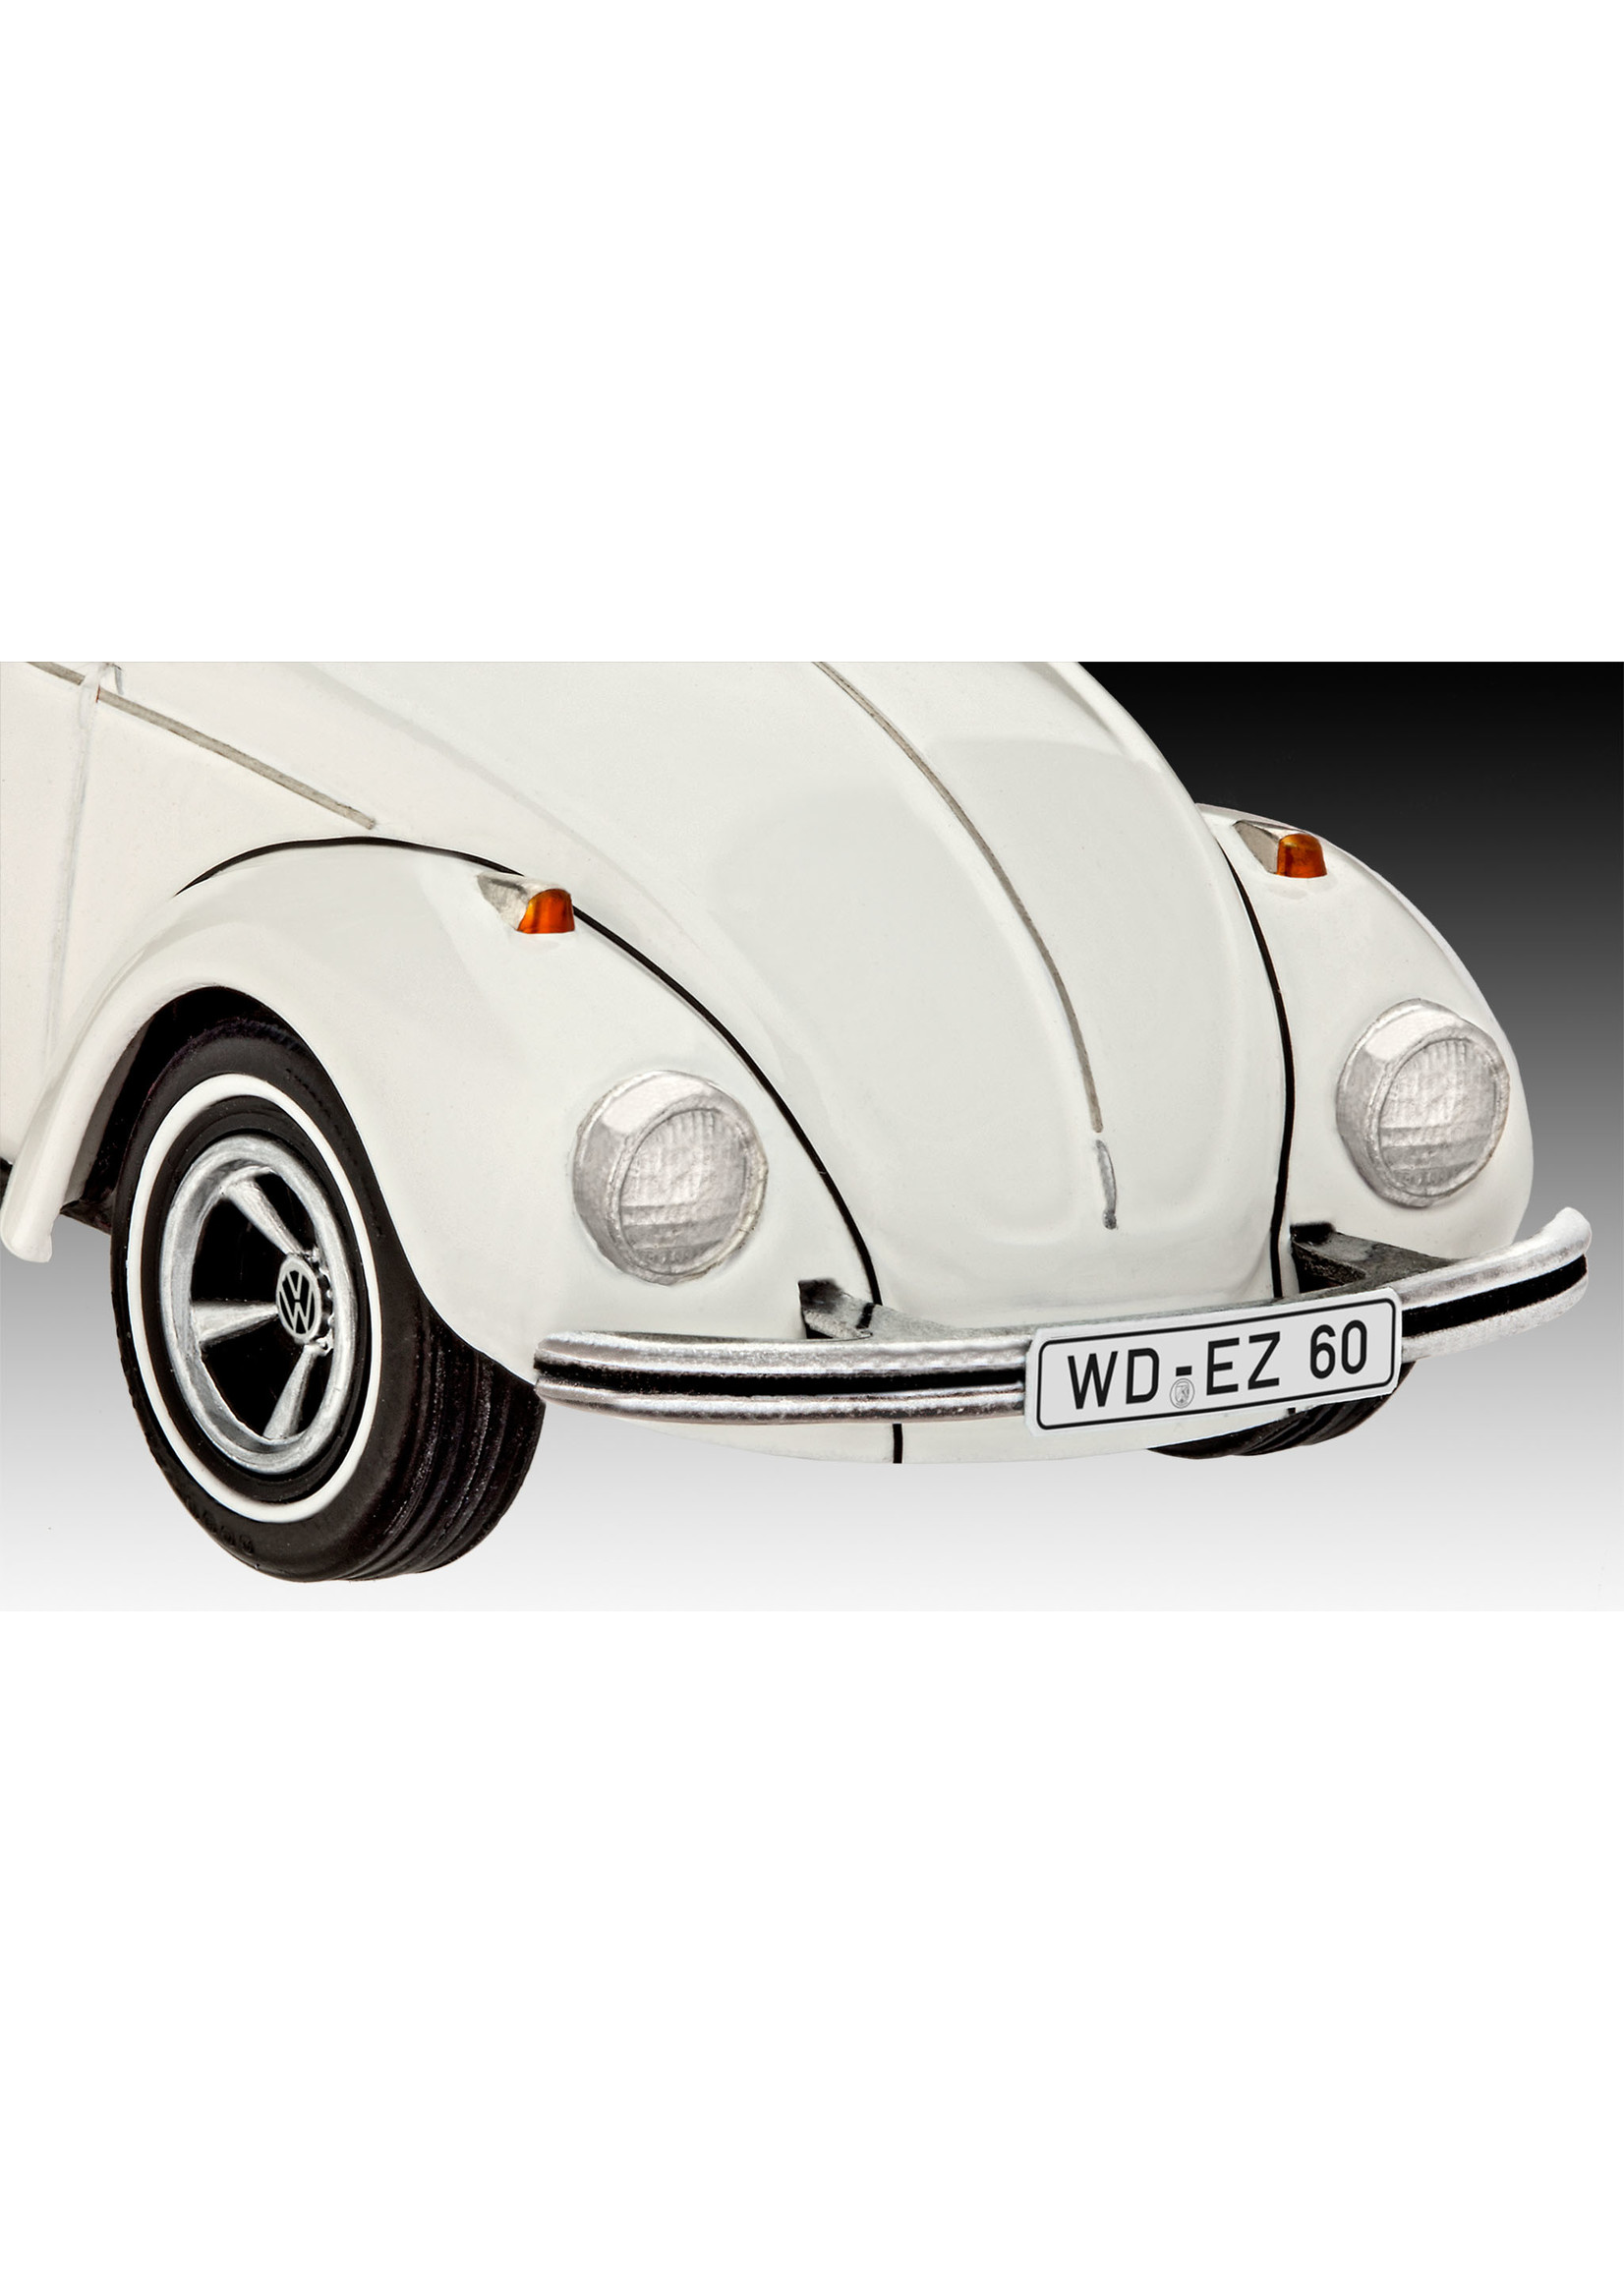 Revell of Germany 07681 - 1/32 VW Beetle